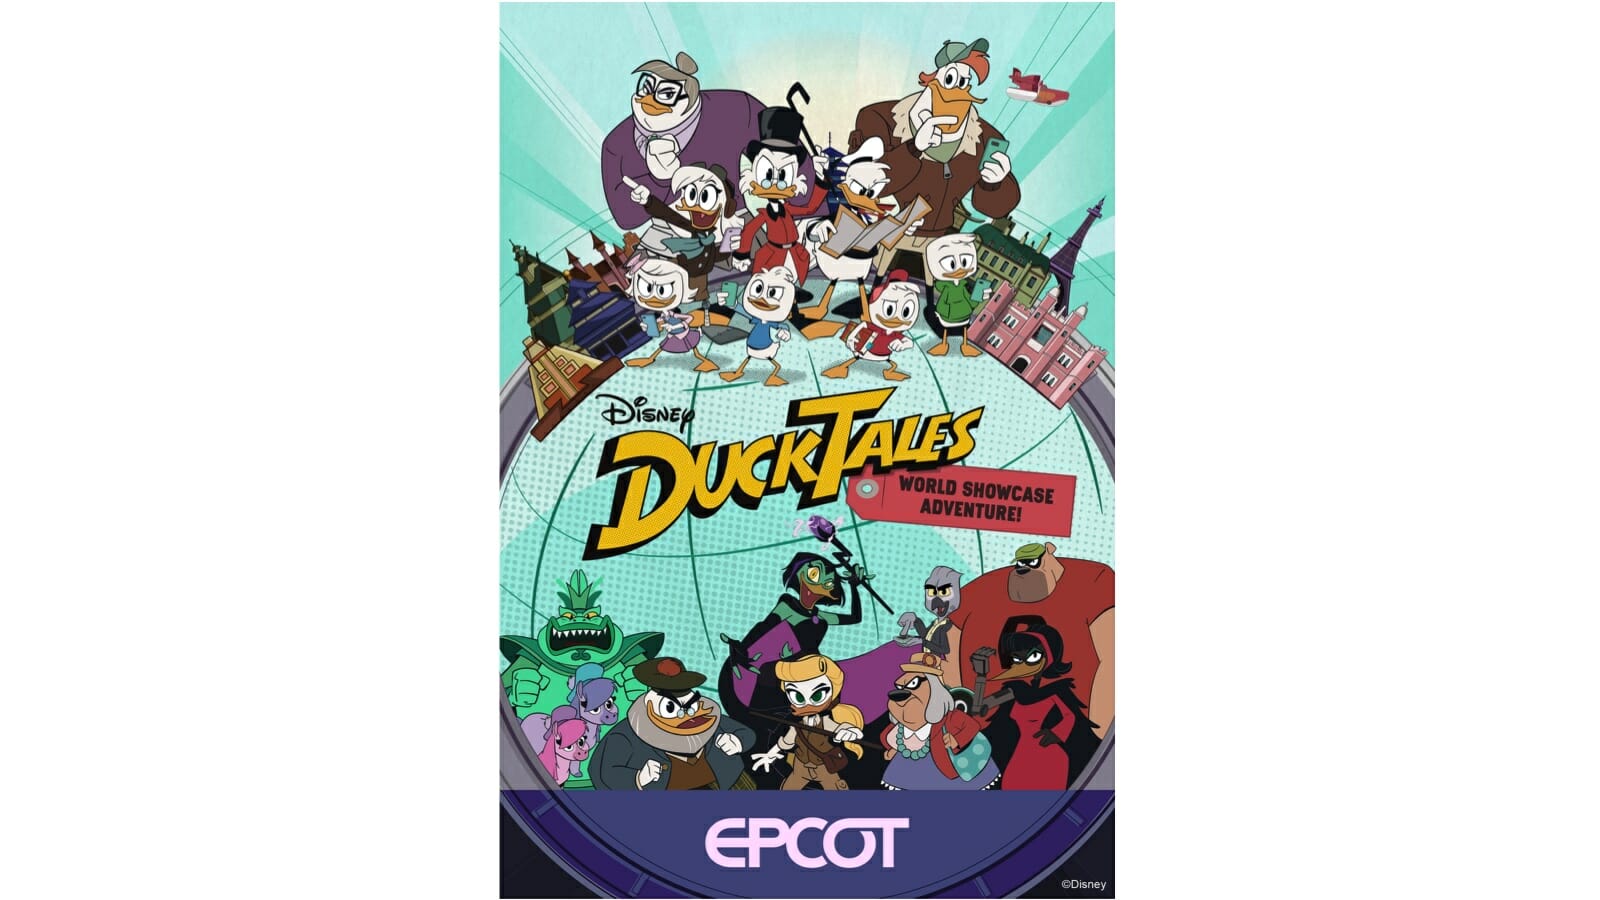 DuckTales World Showcase Adventure Coming to Epcot